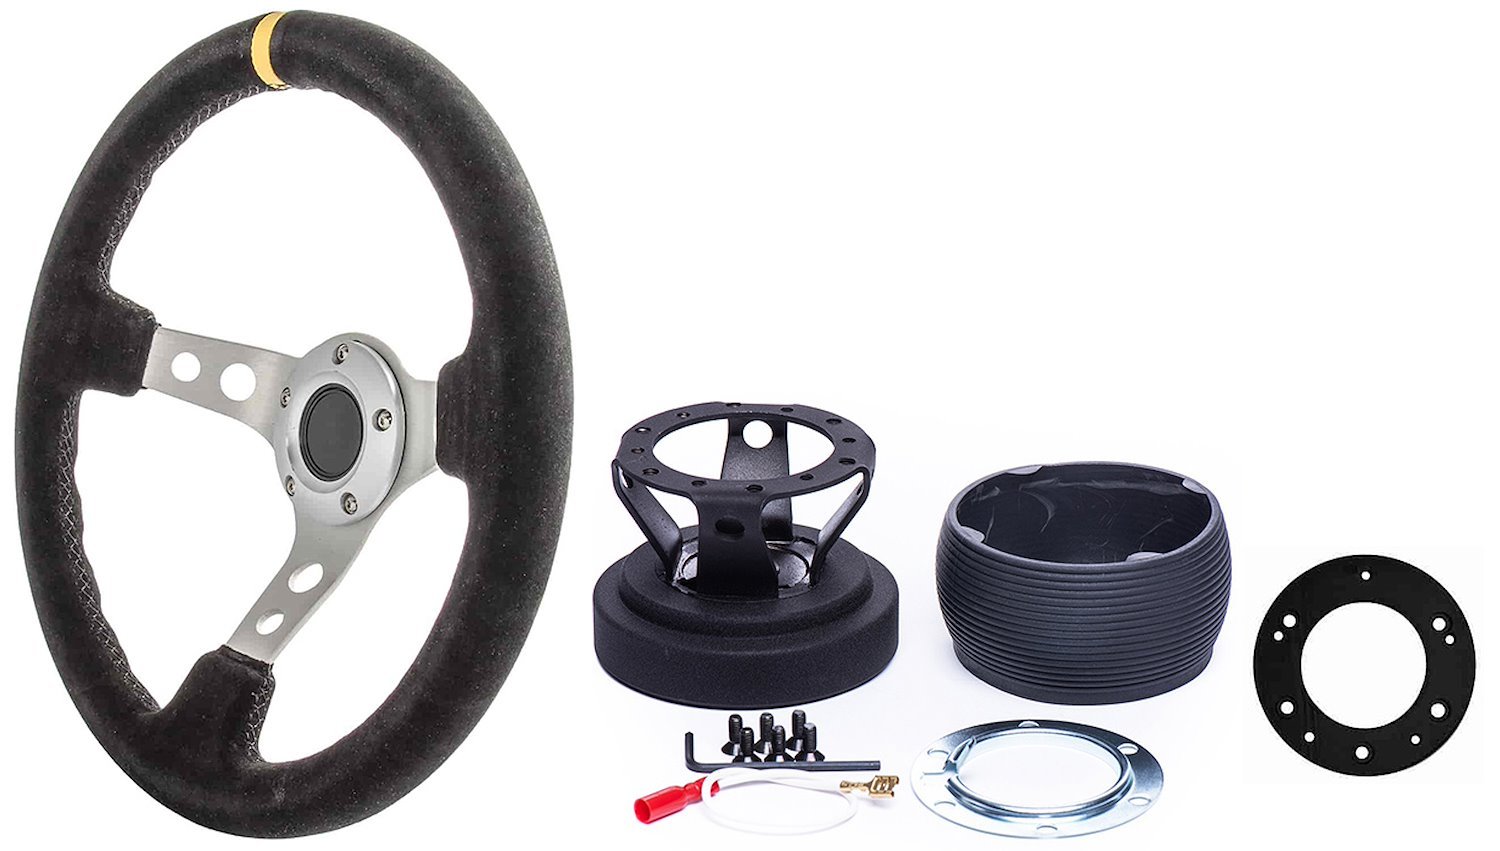 Aluminum Hub Adapter, Adapter Plate, and Black Suede Racing Steering Wheel Kit - Fits Select GM and Mopar Models